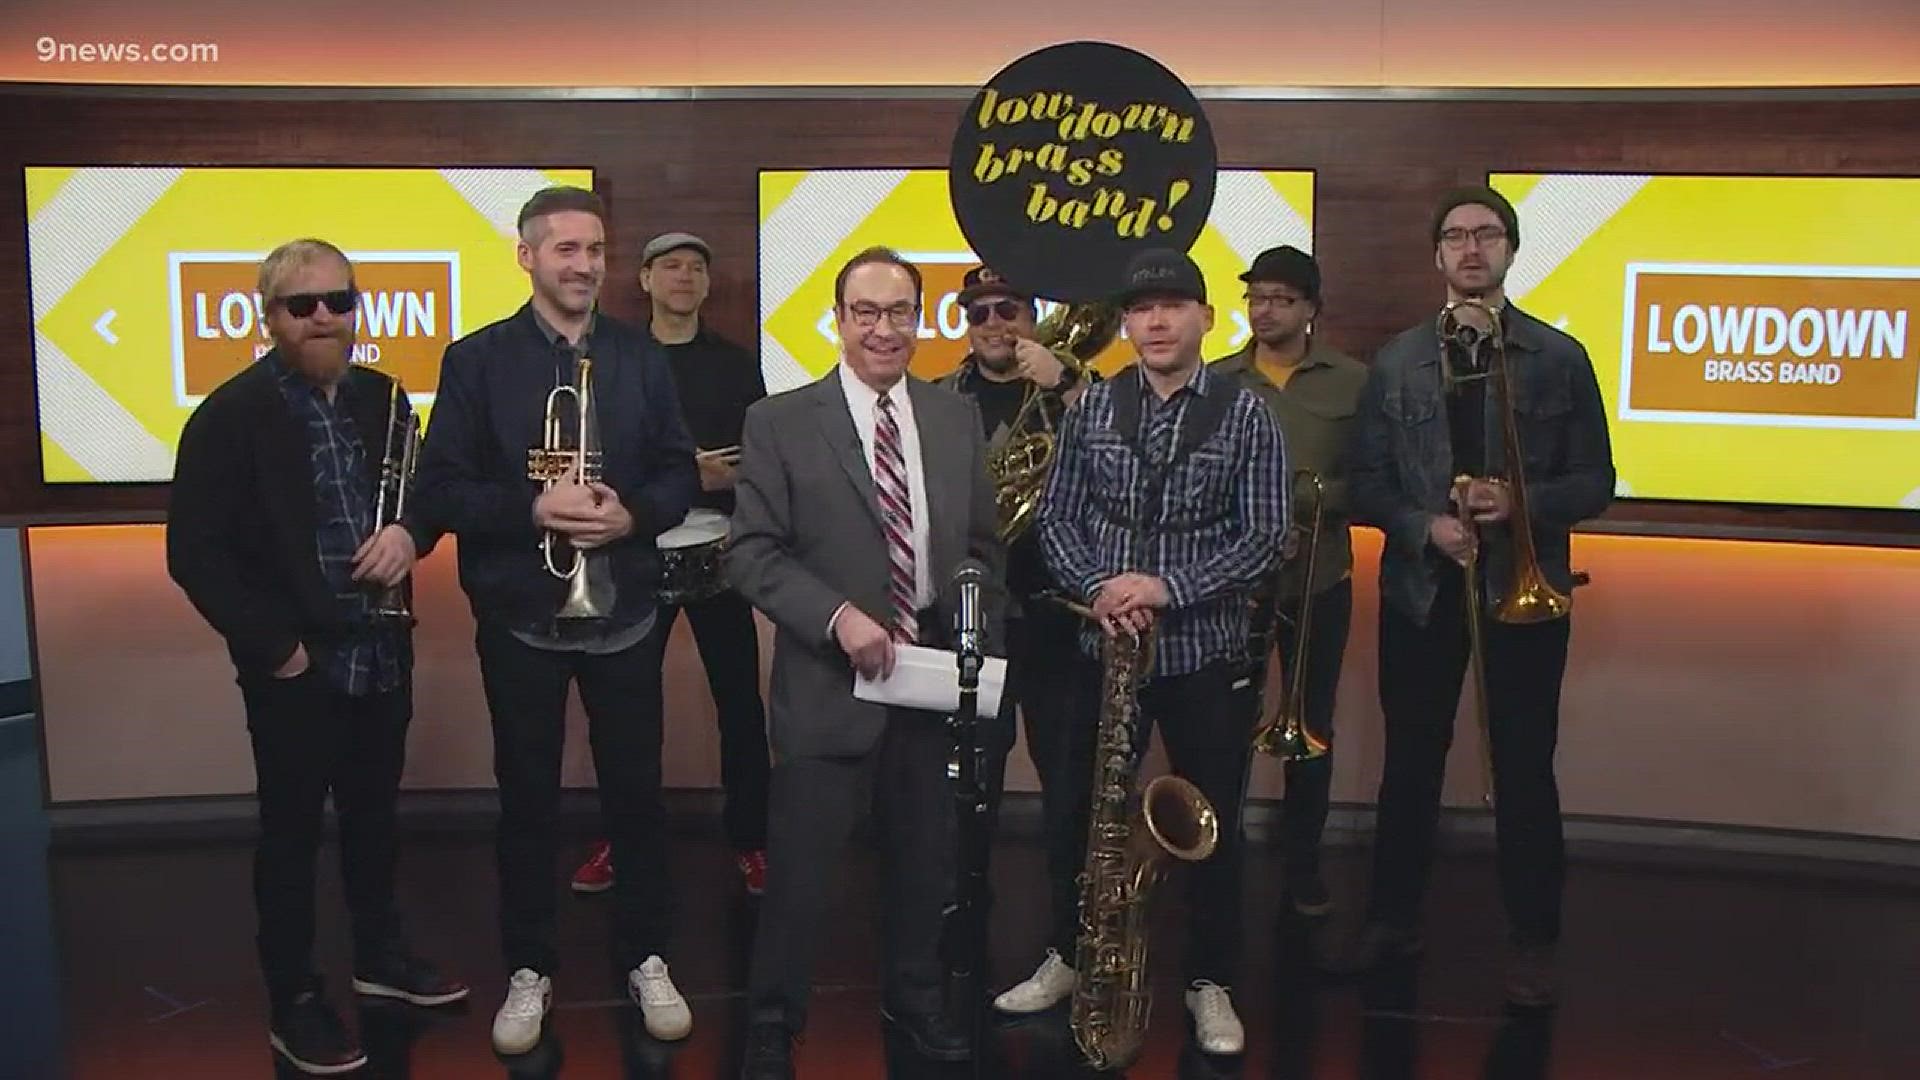 Lowdown Brass Band will play Dazzle Tuesday in Denver. They stopped by to play for us during the 9NEWS morning show.